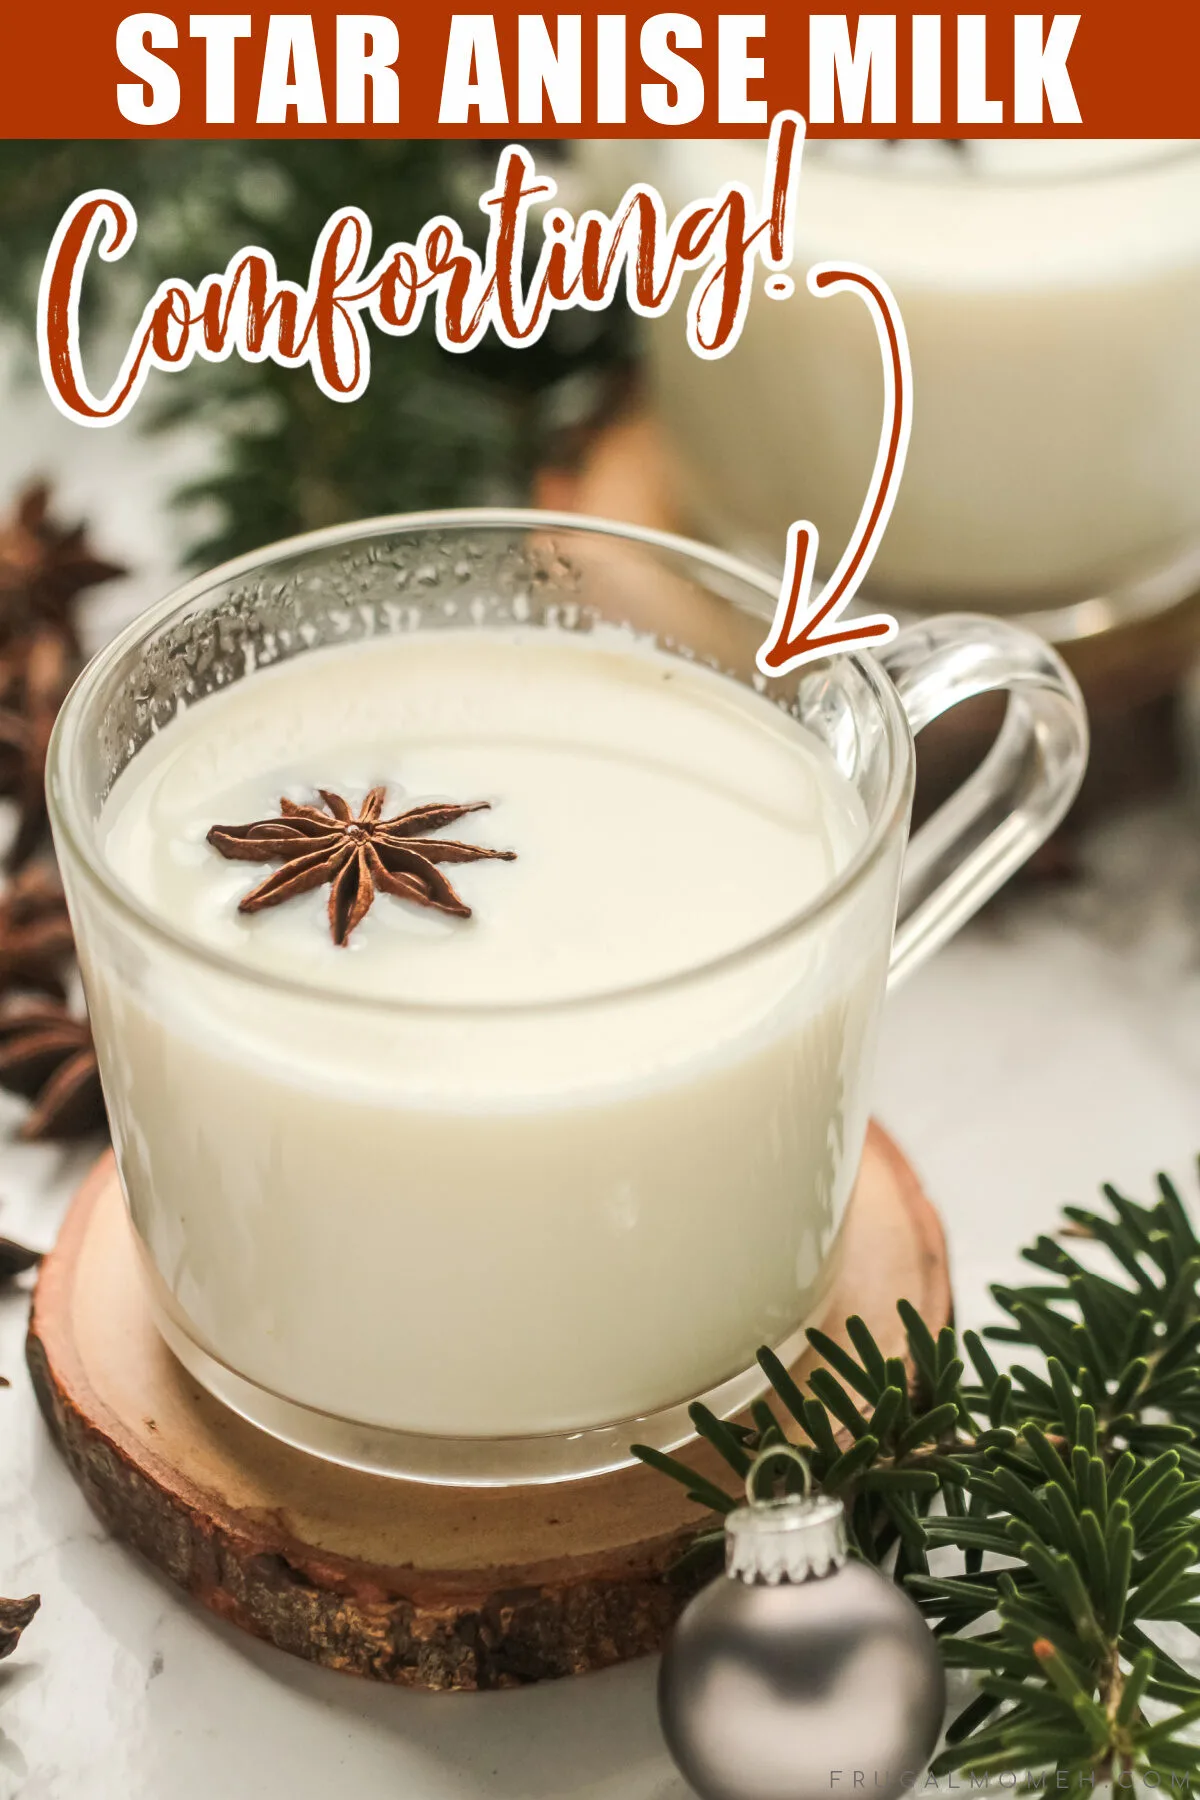 A delicious Star Anise milk recipe perfect for the holidays or any time! This warm, comforting drink is easy to make and has a lovely aroma.